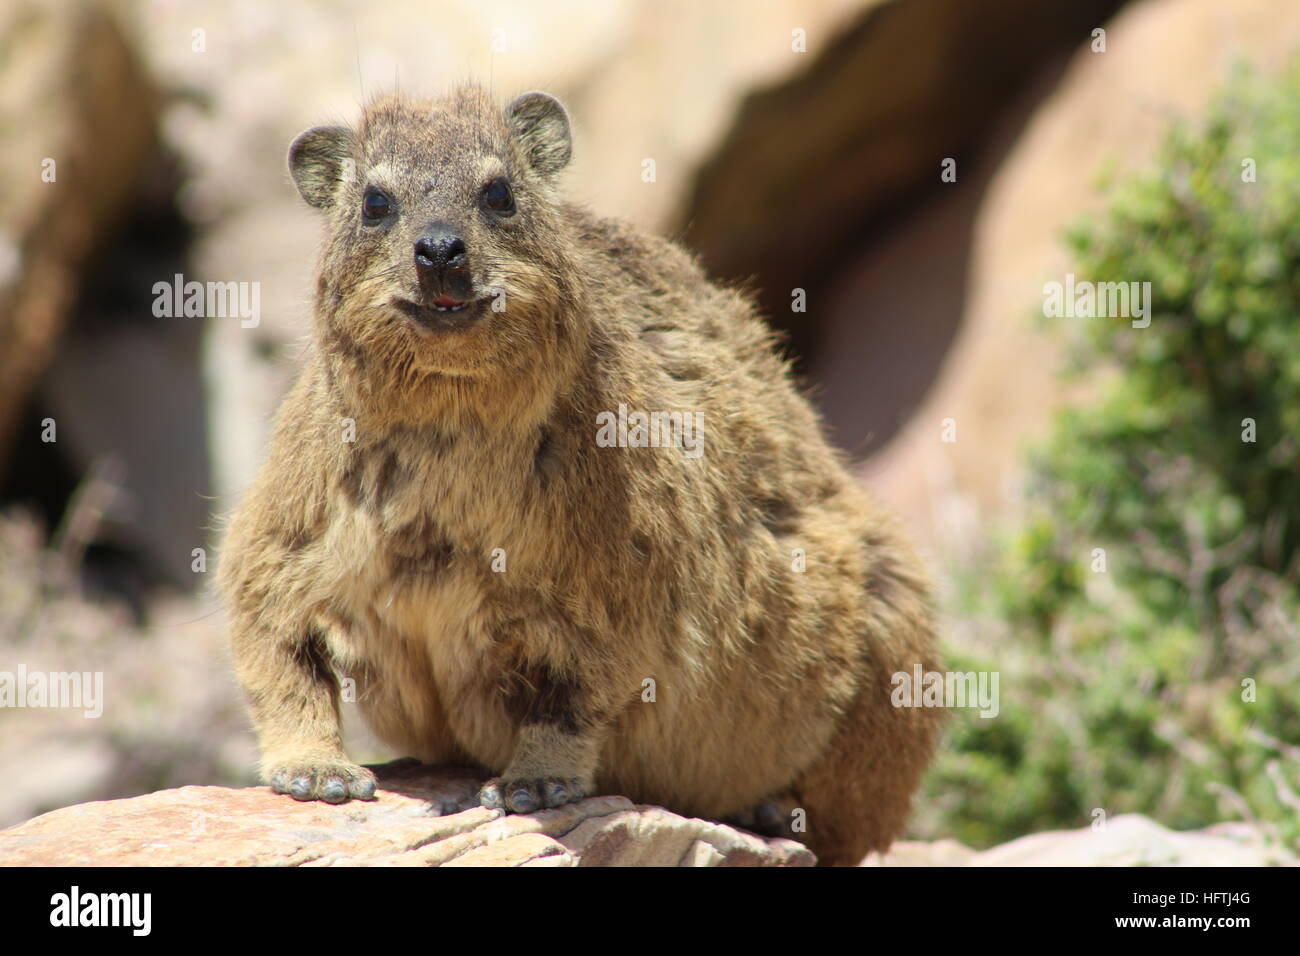 Hyrax in Mossel Bay, South Africa. In South Africa specifically known as a Dassie. Also called a rock rabbit. Stock Photo